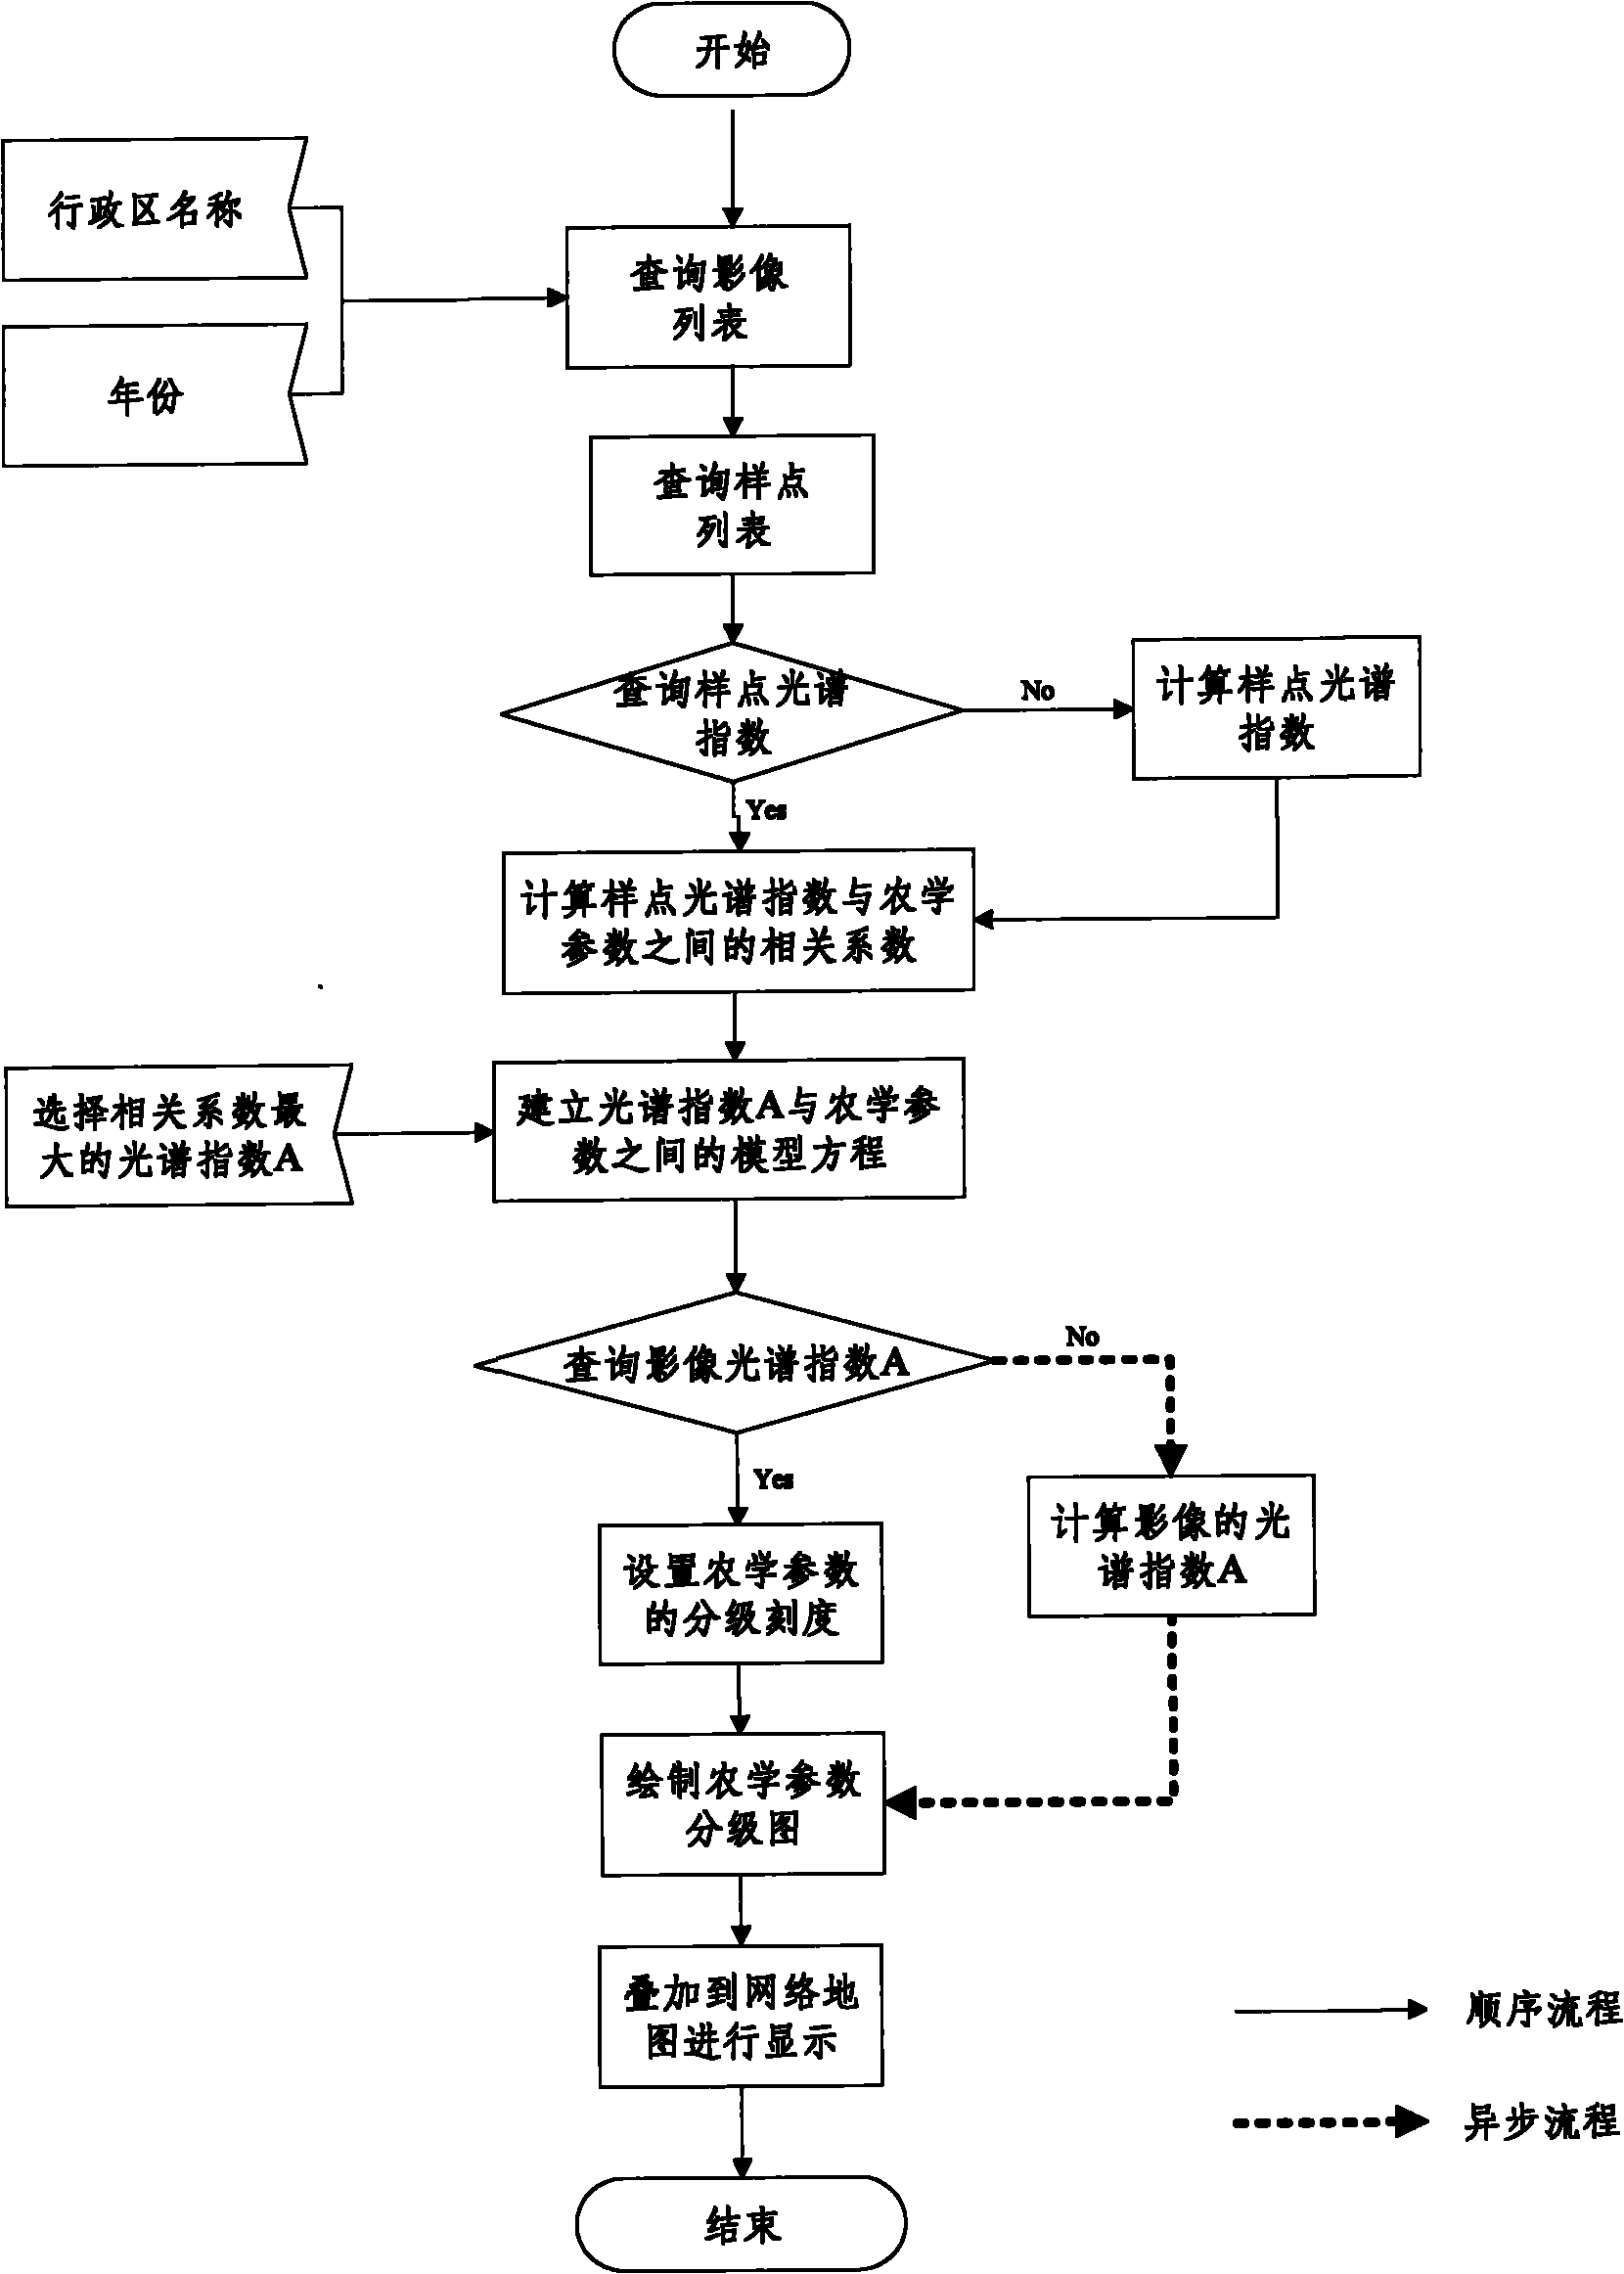 Method for processing and issuing remote sensing image data